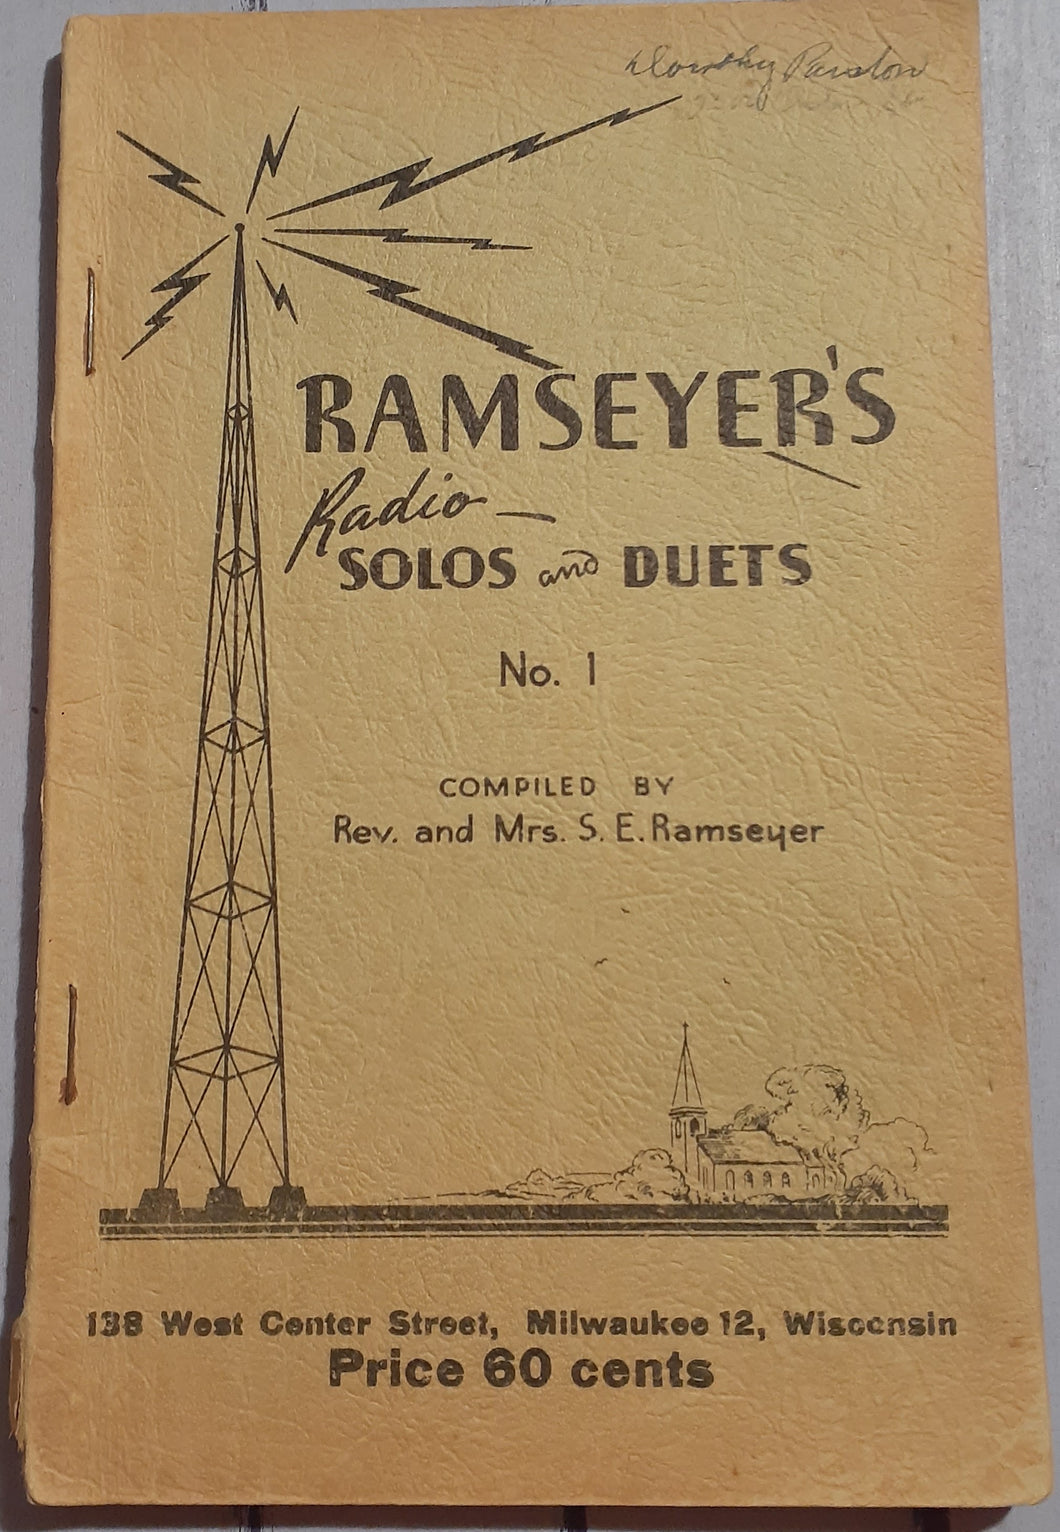 Ramseyer's Radio Solos and Duets No. 1